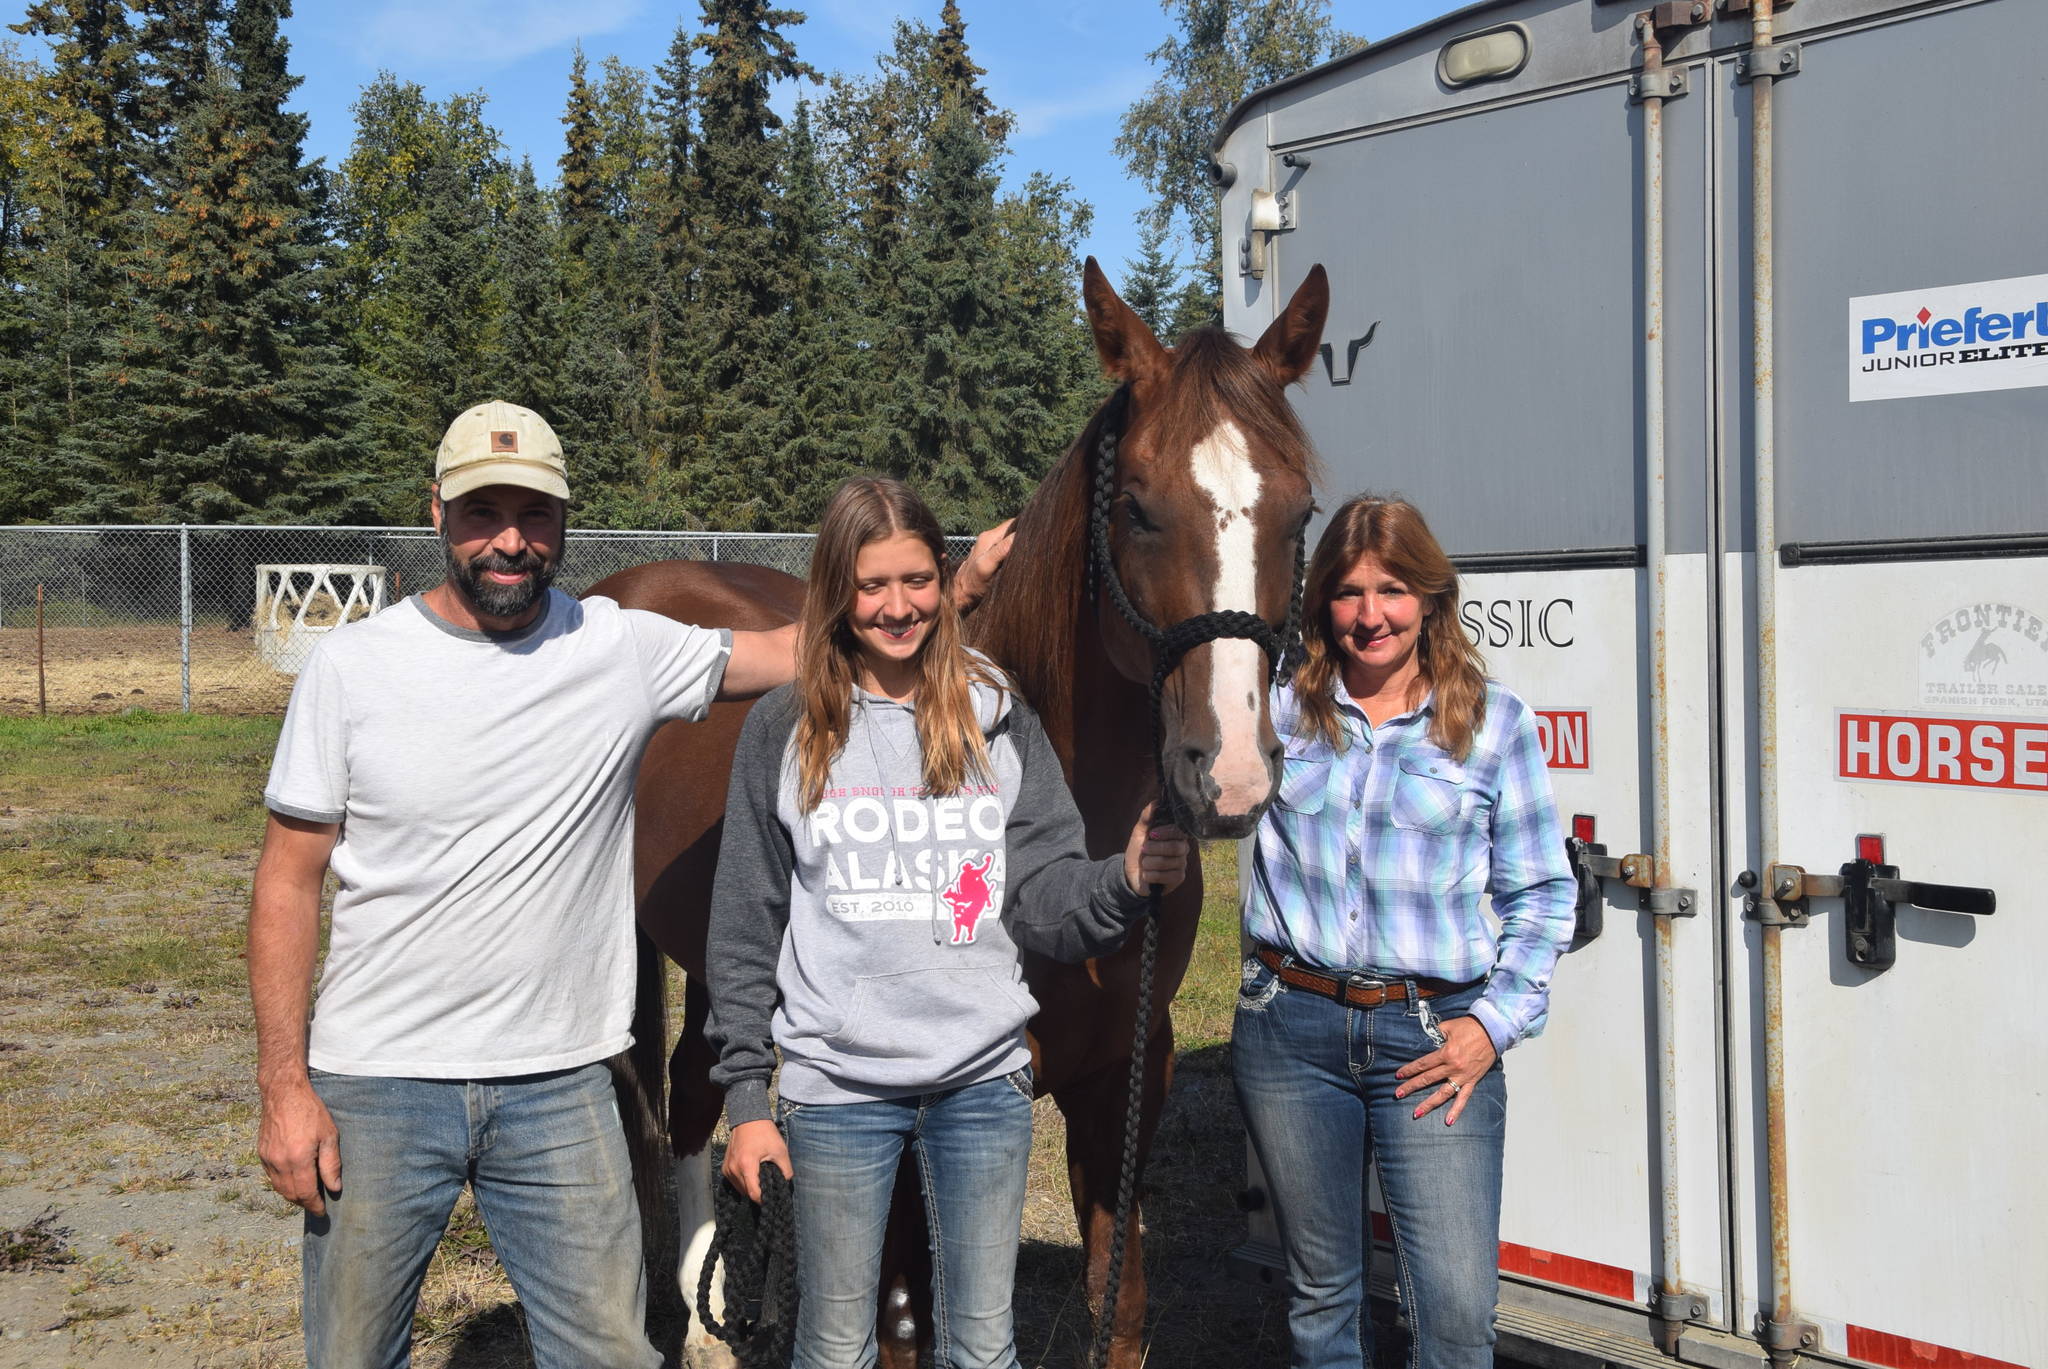 Brian Mazurek/Peninsula Clarion                                From left, Mike, Laura and Robin Haight stand with their horse at the Soldotna Rodeo Grounds in Soldotna on Tuesday. The family has been keeping its two horses at the rodeo grounds since last week. The family had to leave them in Soldotna while they drove up to Palmer for the Alaska State Fair.